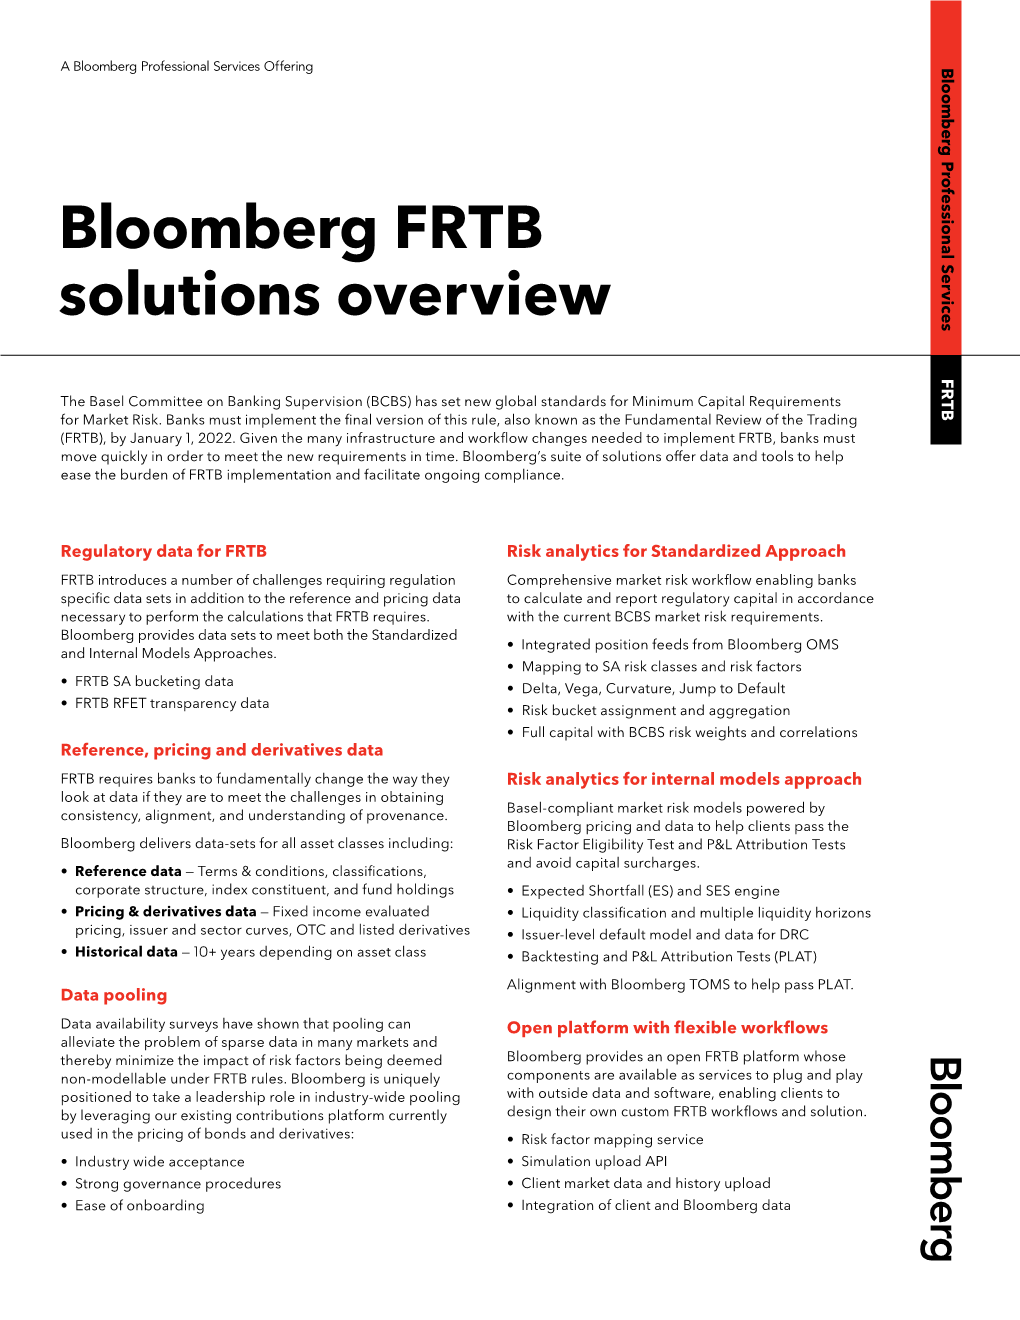 Bloomberg FRTB Solutions Overview FRTB